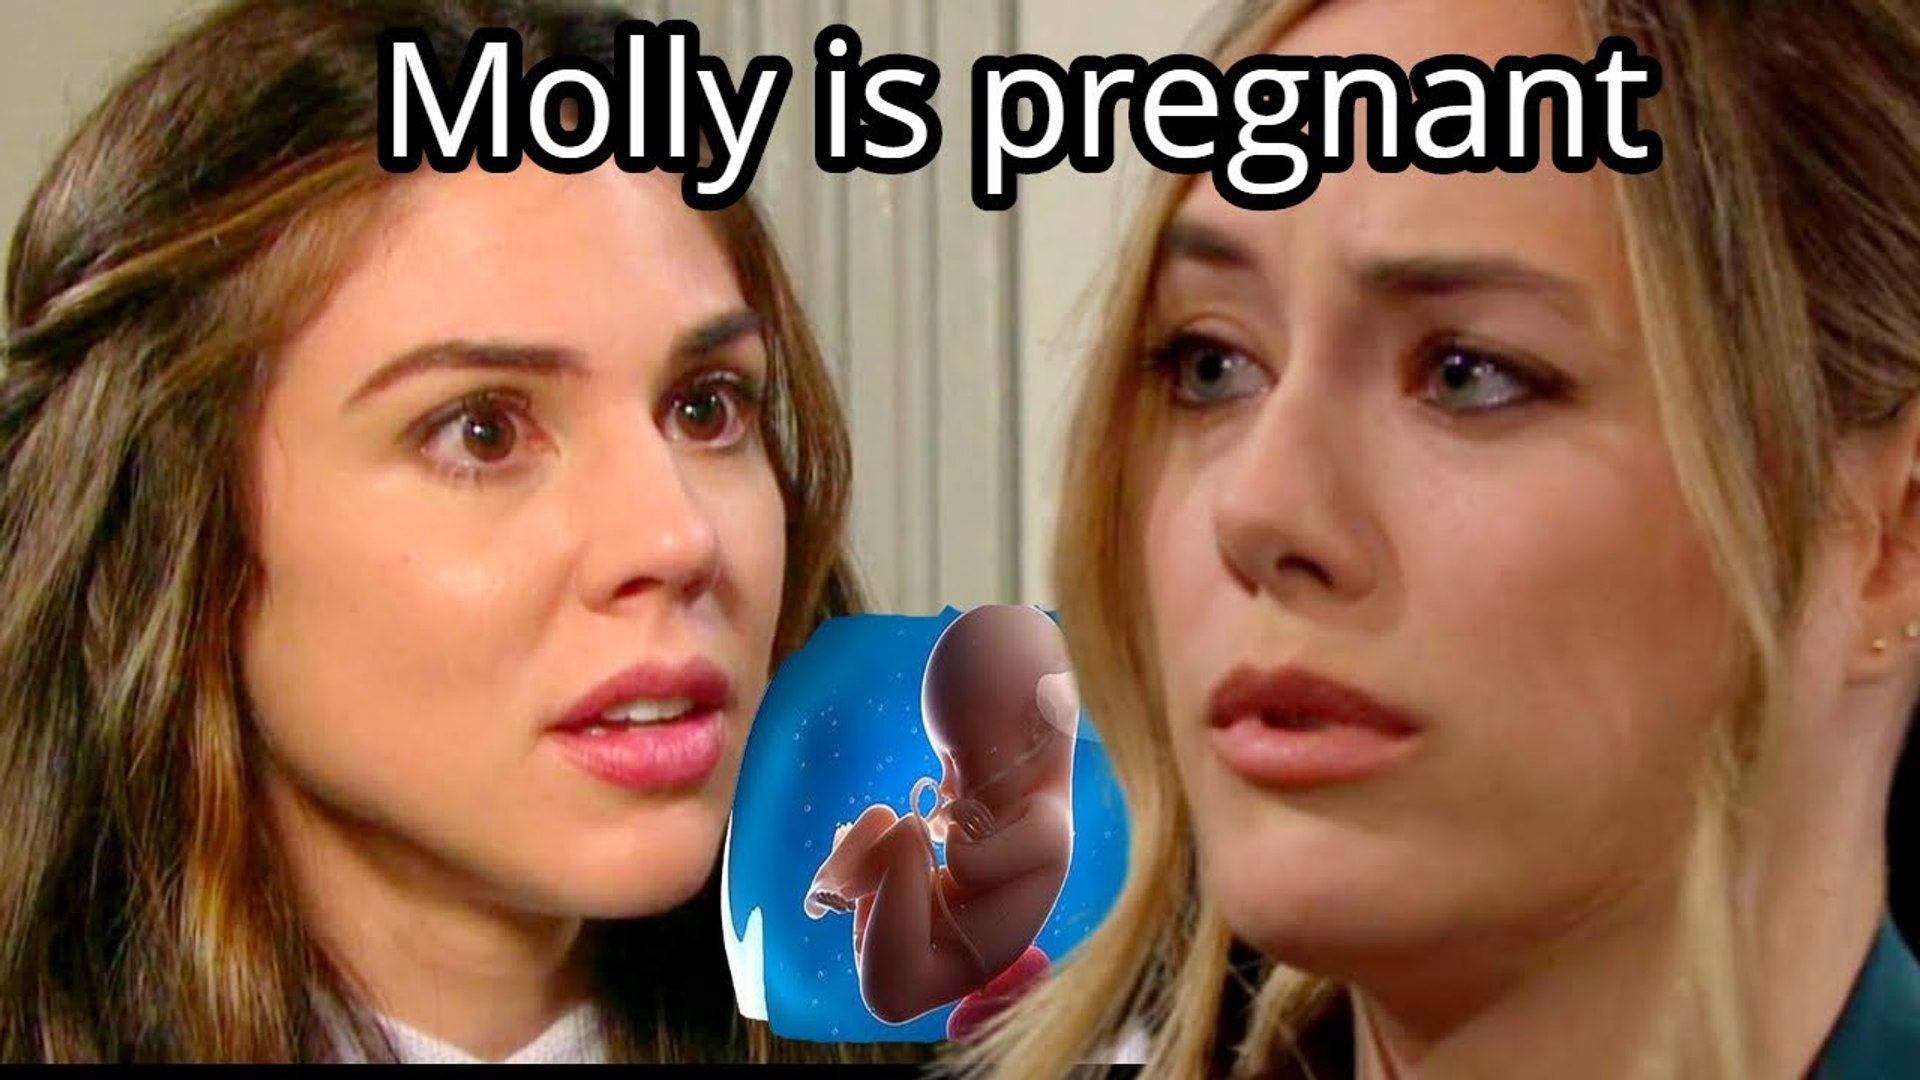 General Hospital Shocking Spoilers Molly is pregnant, Kristina's pregnancy  plan fell apart - video Dailymotion